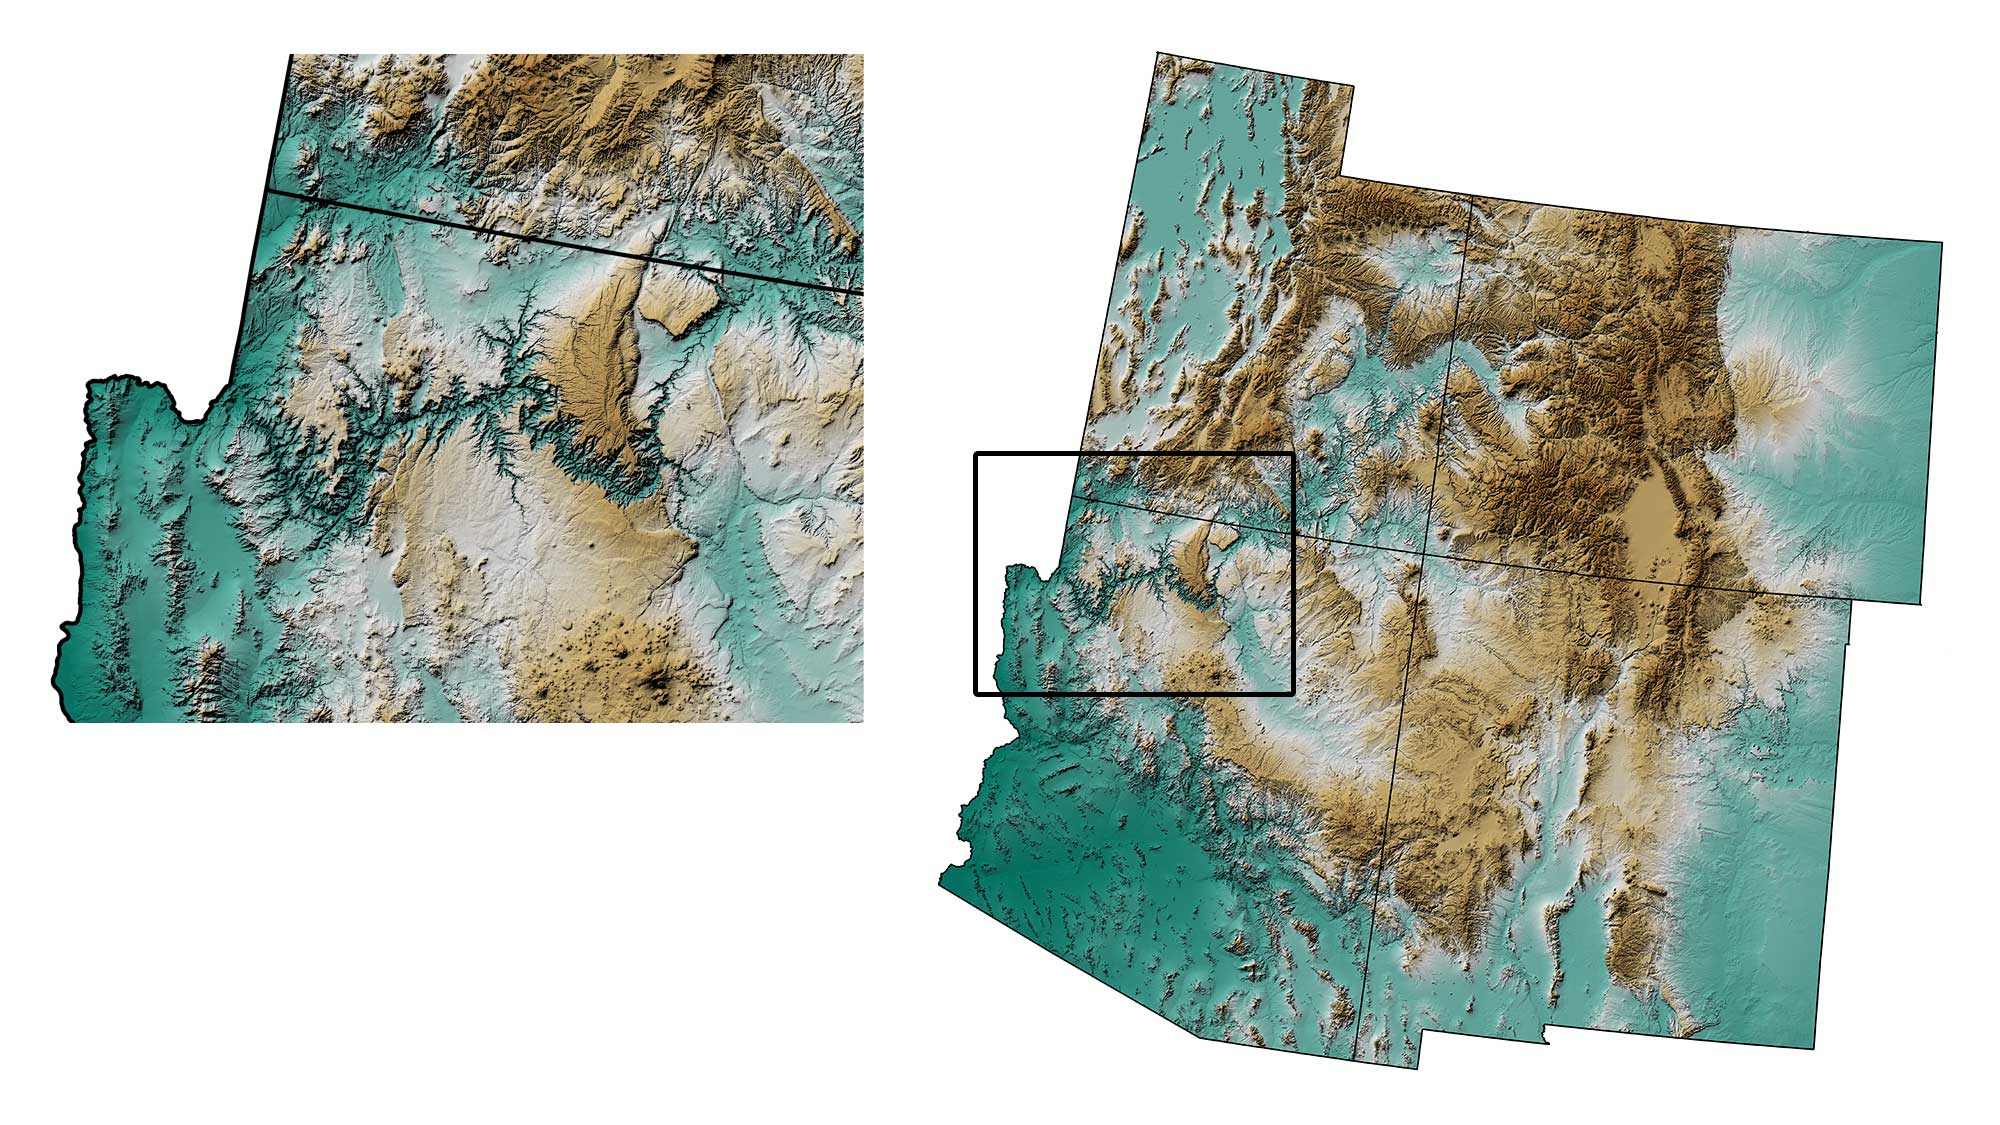 Image showing the topography of the southwestern United States with a zoomed-in inset of the Grand Canyon.